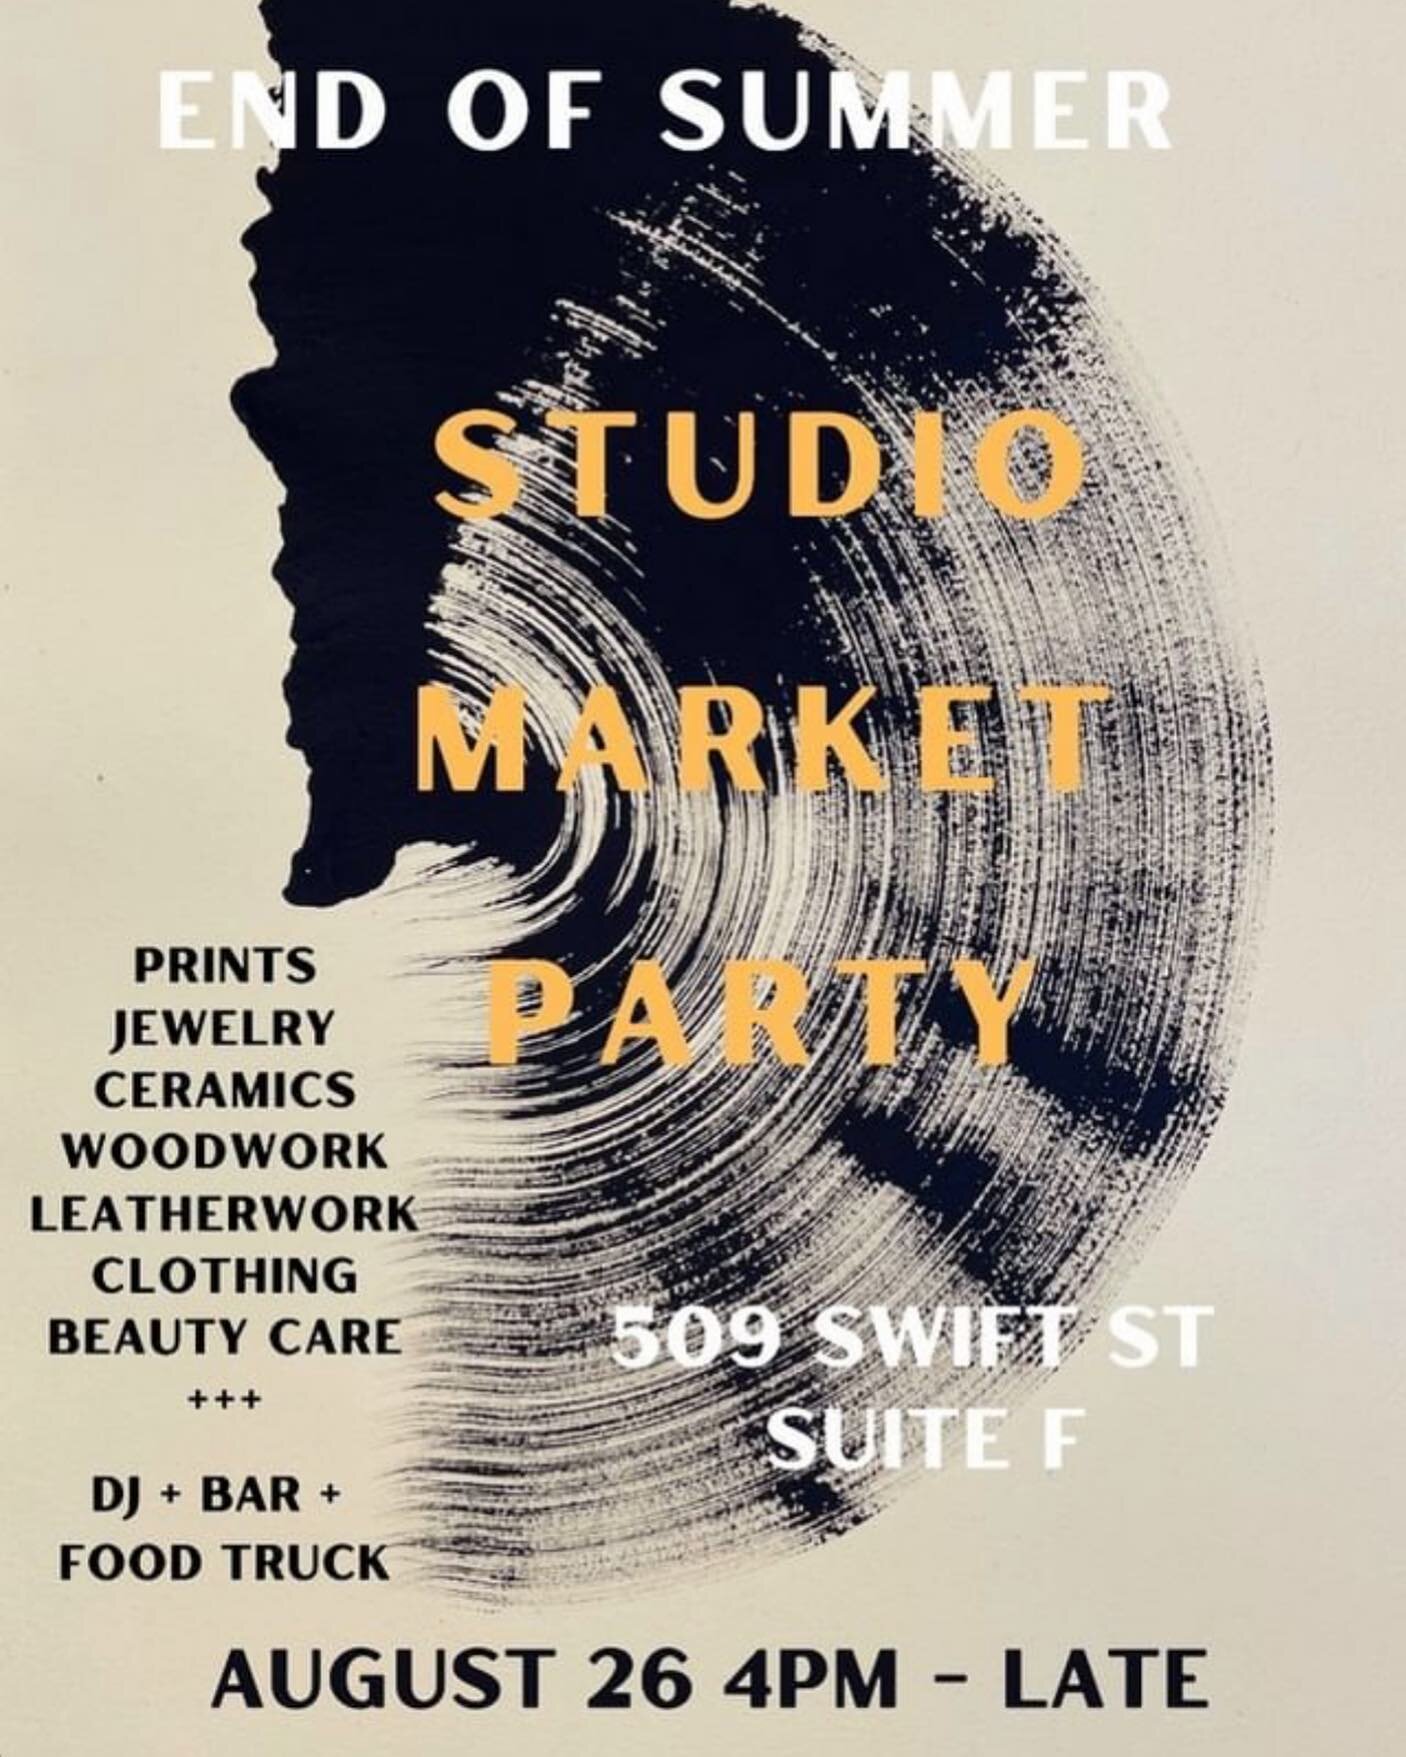 Santa Cruz friends! My lovely shopmates @thewoodress,  @wildersage_ and I are hosting an end of summer makers event this Friday! I feel very blessed to be among such a rad community of makers in Santa Cruz and it would be an absolute treat to have a 